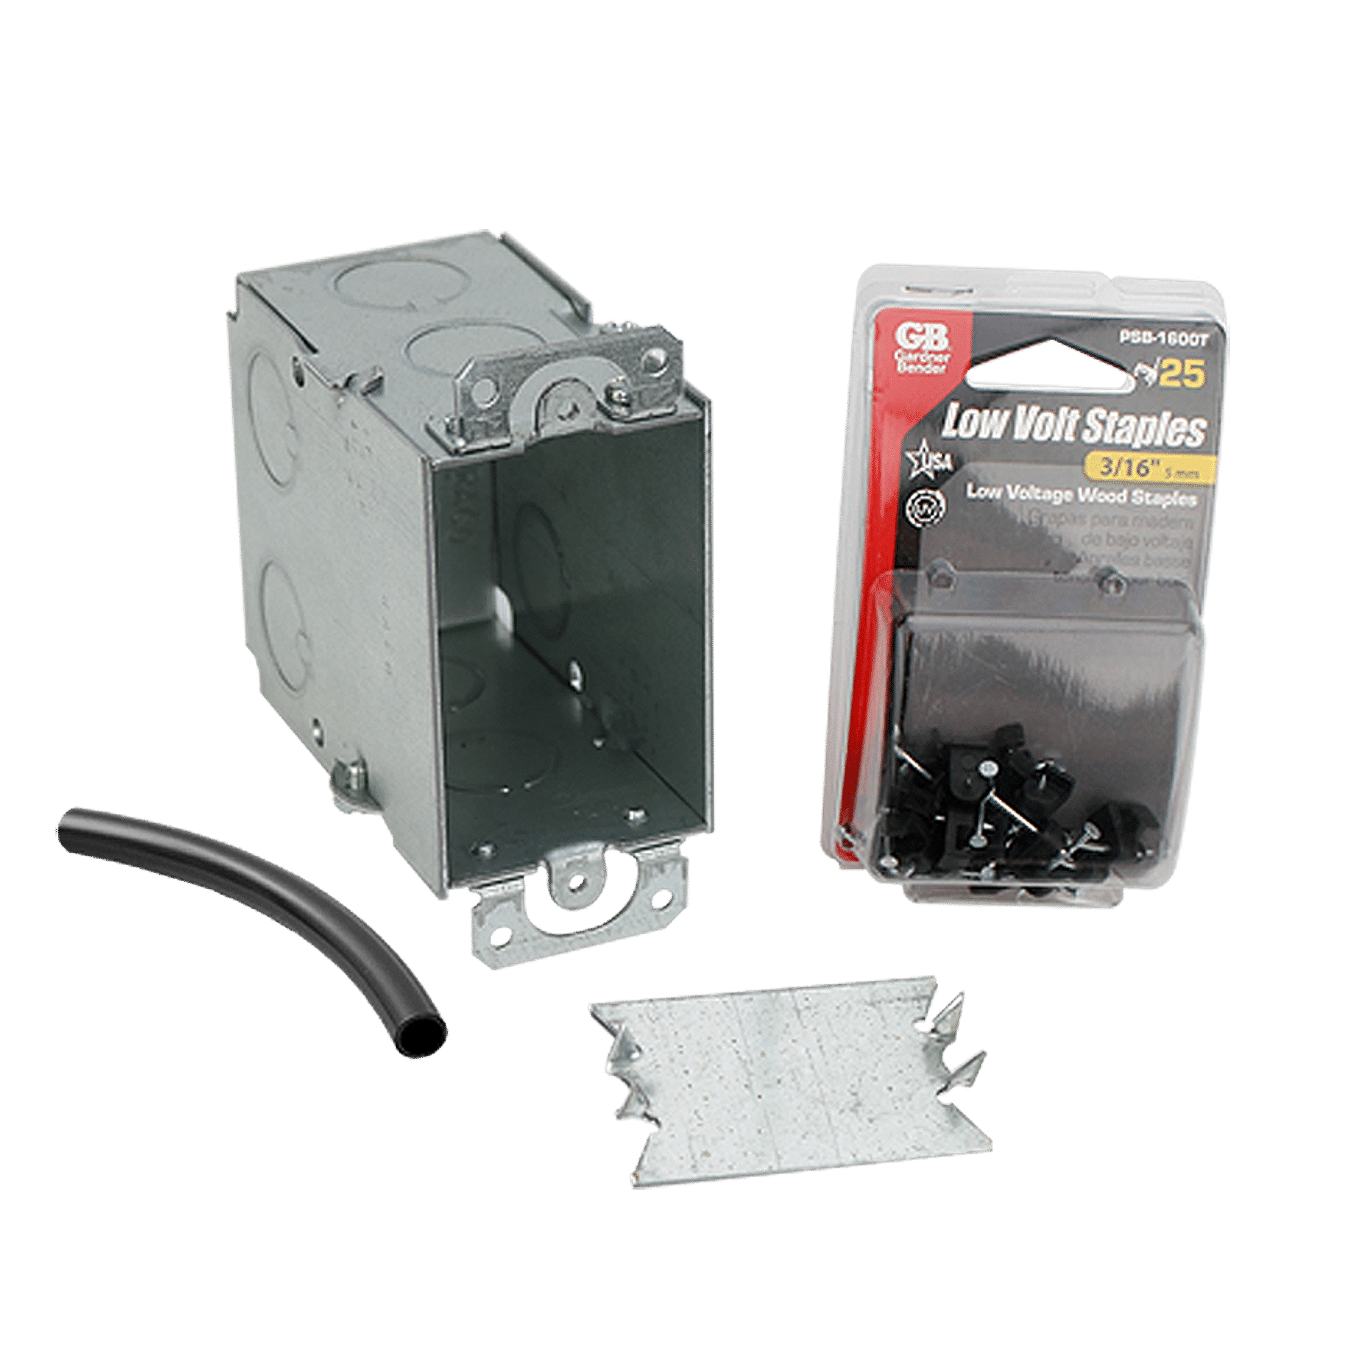 Electrical Rough-in Kit Single Gang Box without Conduit